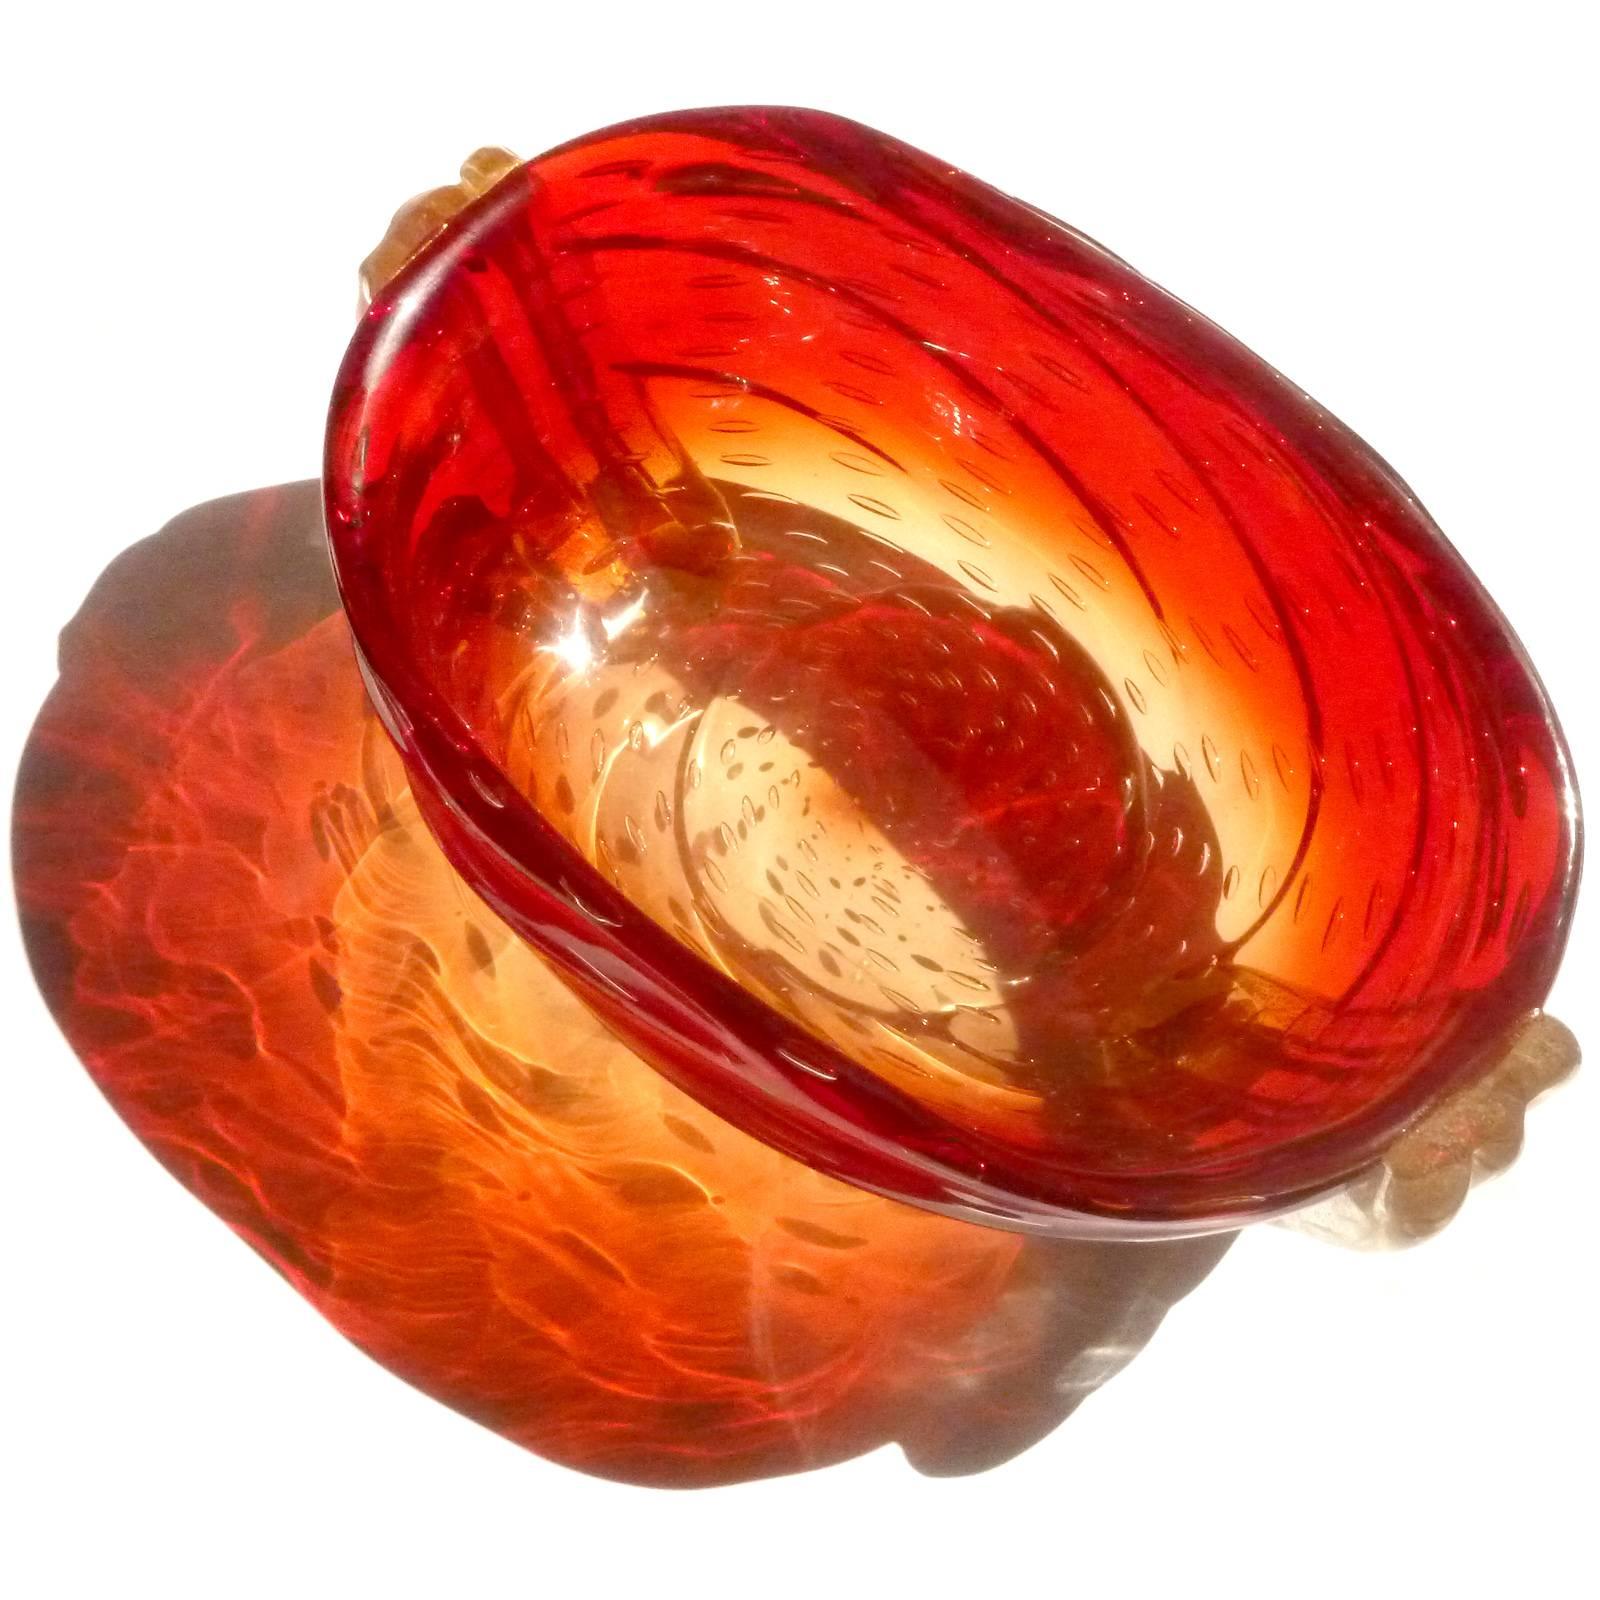 Free shipping worldwide! See details below description.

Murano handblown red orange amberina, controlled bubbles and gold flecks art glass bowl. Documented to the Barovier e Toso company. The piece has a ribbed body, with large bands of gold on